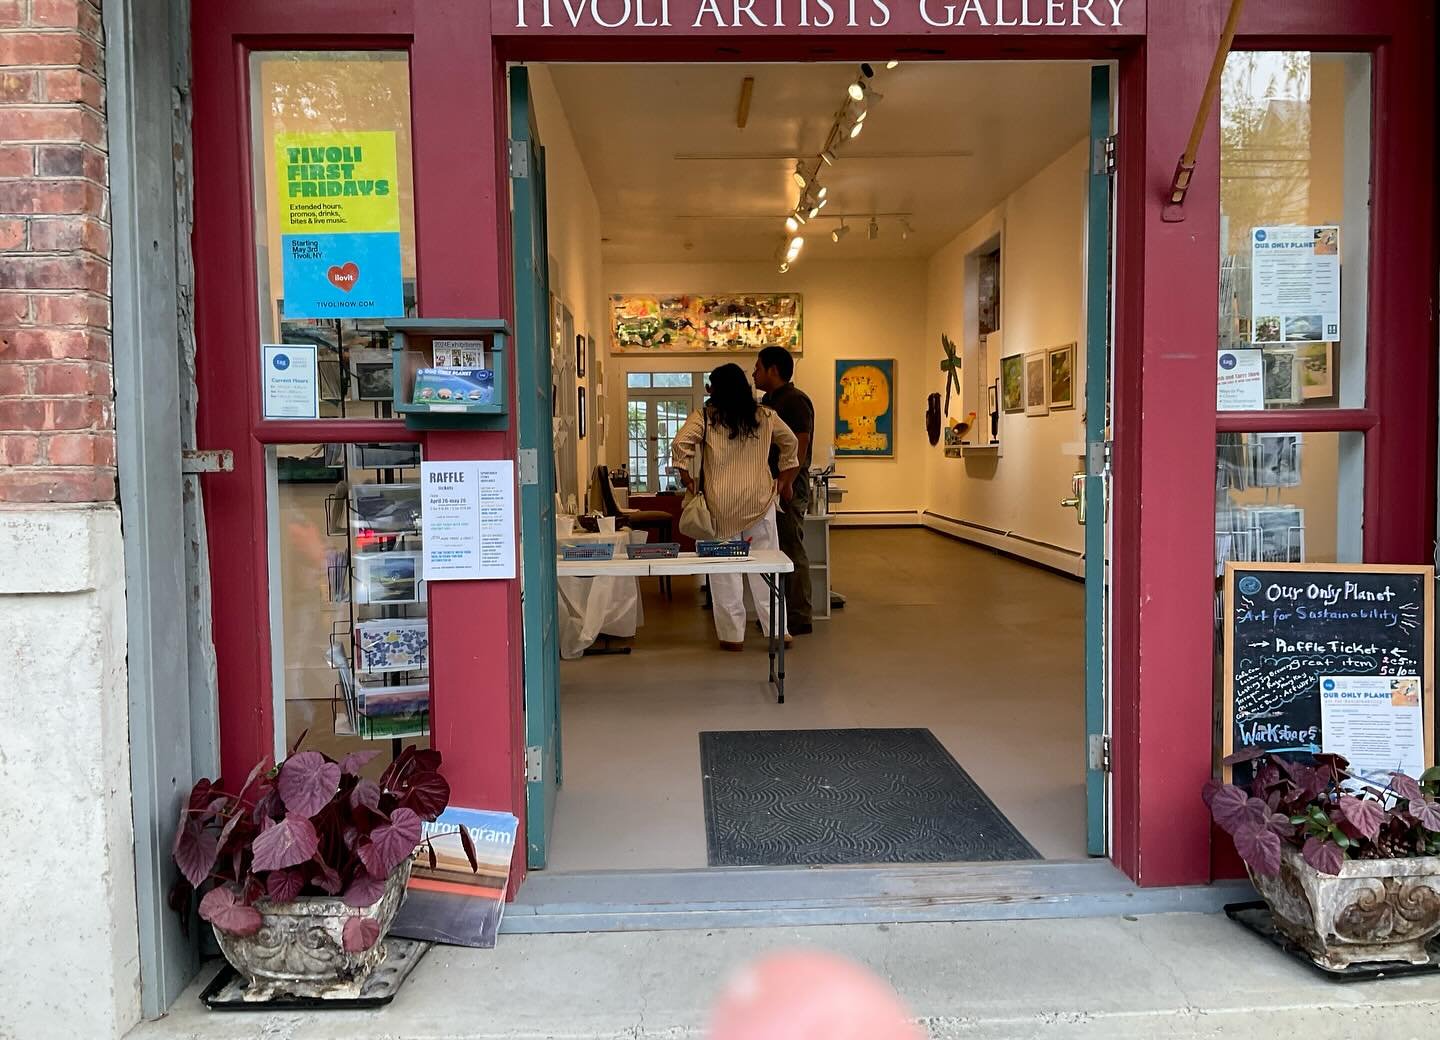 First Fridays 😄 Stop by Tivoli Artist Gallery  work on a community art piece, grab a snack, explore the fantastic art, buy some tickets for an amazing raffle, or sign up for one of the workshops being offered. #localartist #artinthehudsonvalley #hud